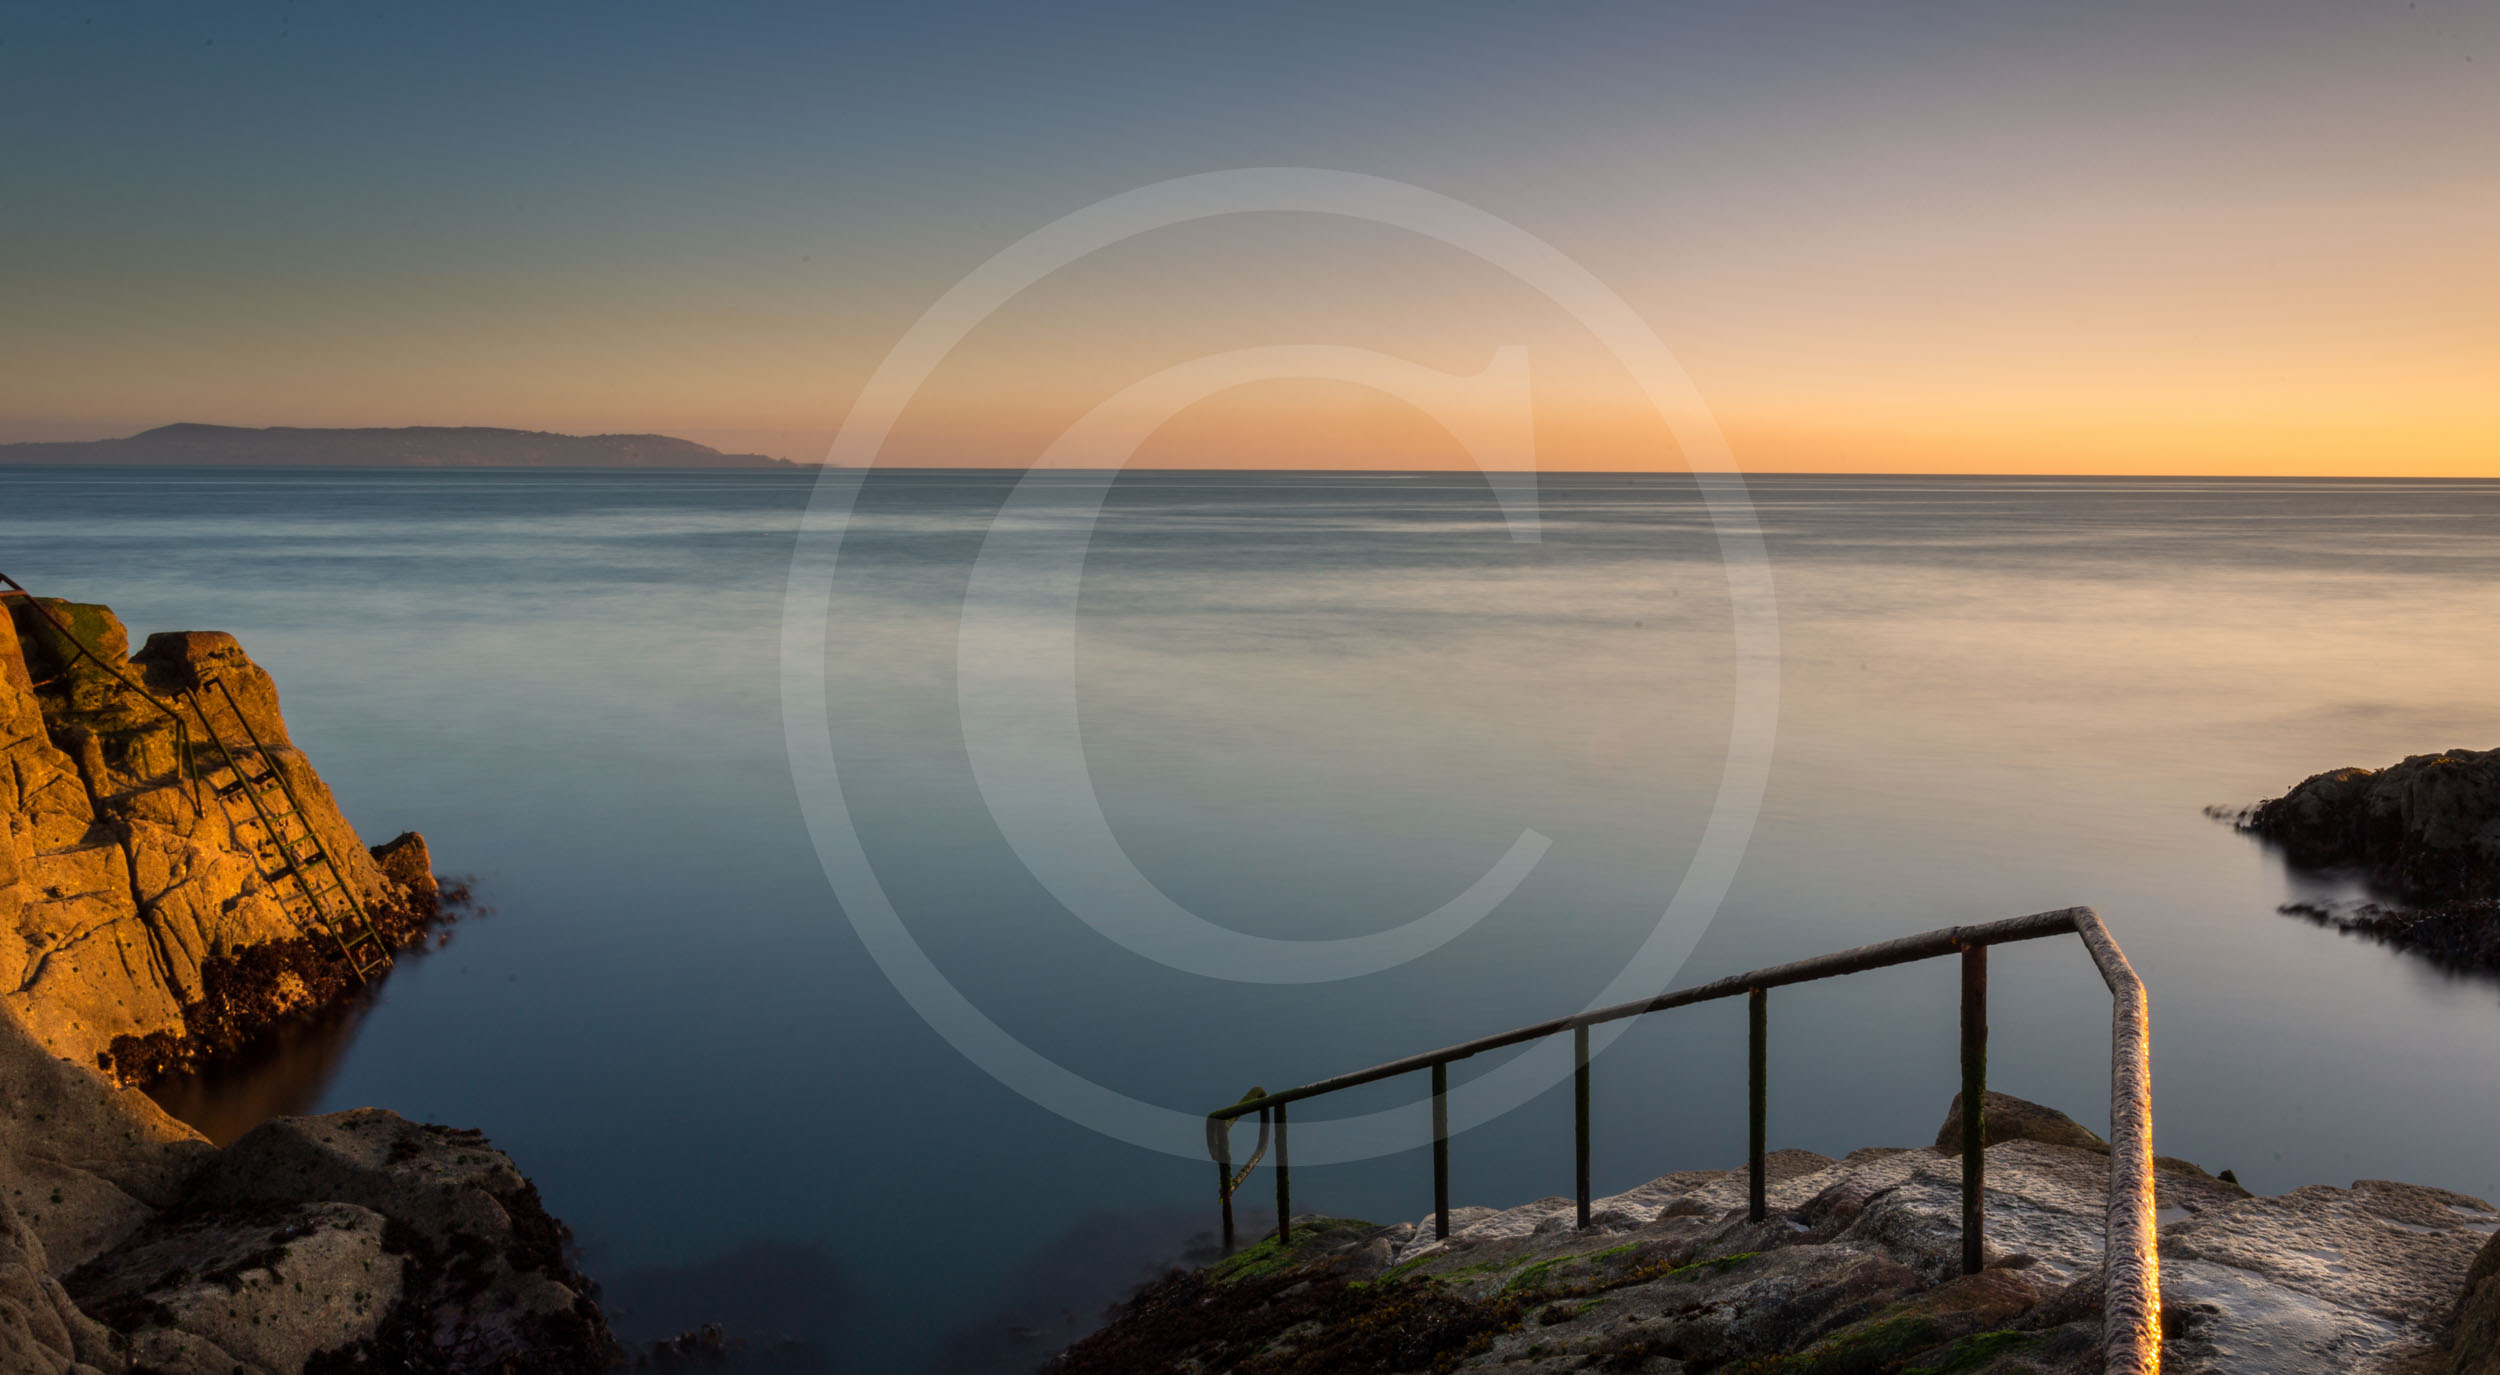 Sunrise at the Forty Foot, Dublin